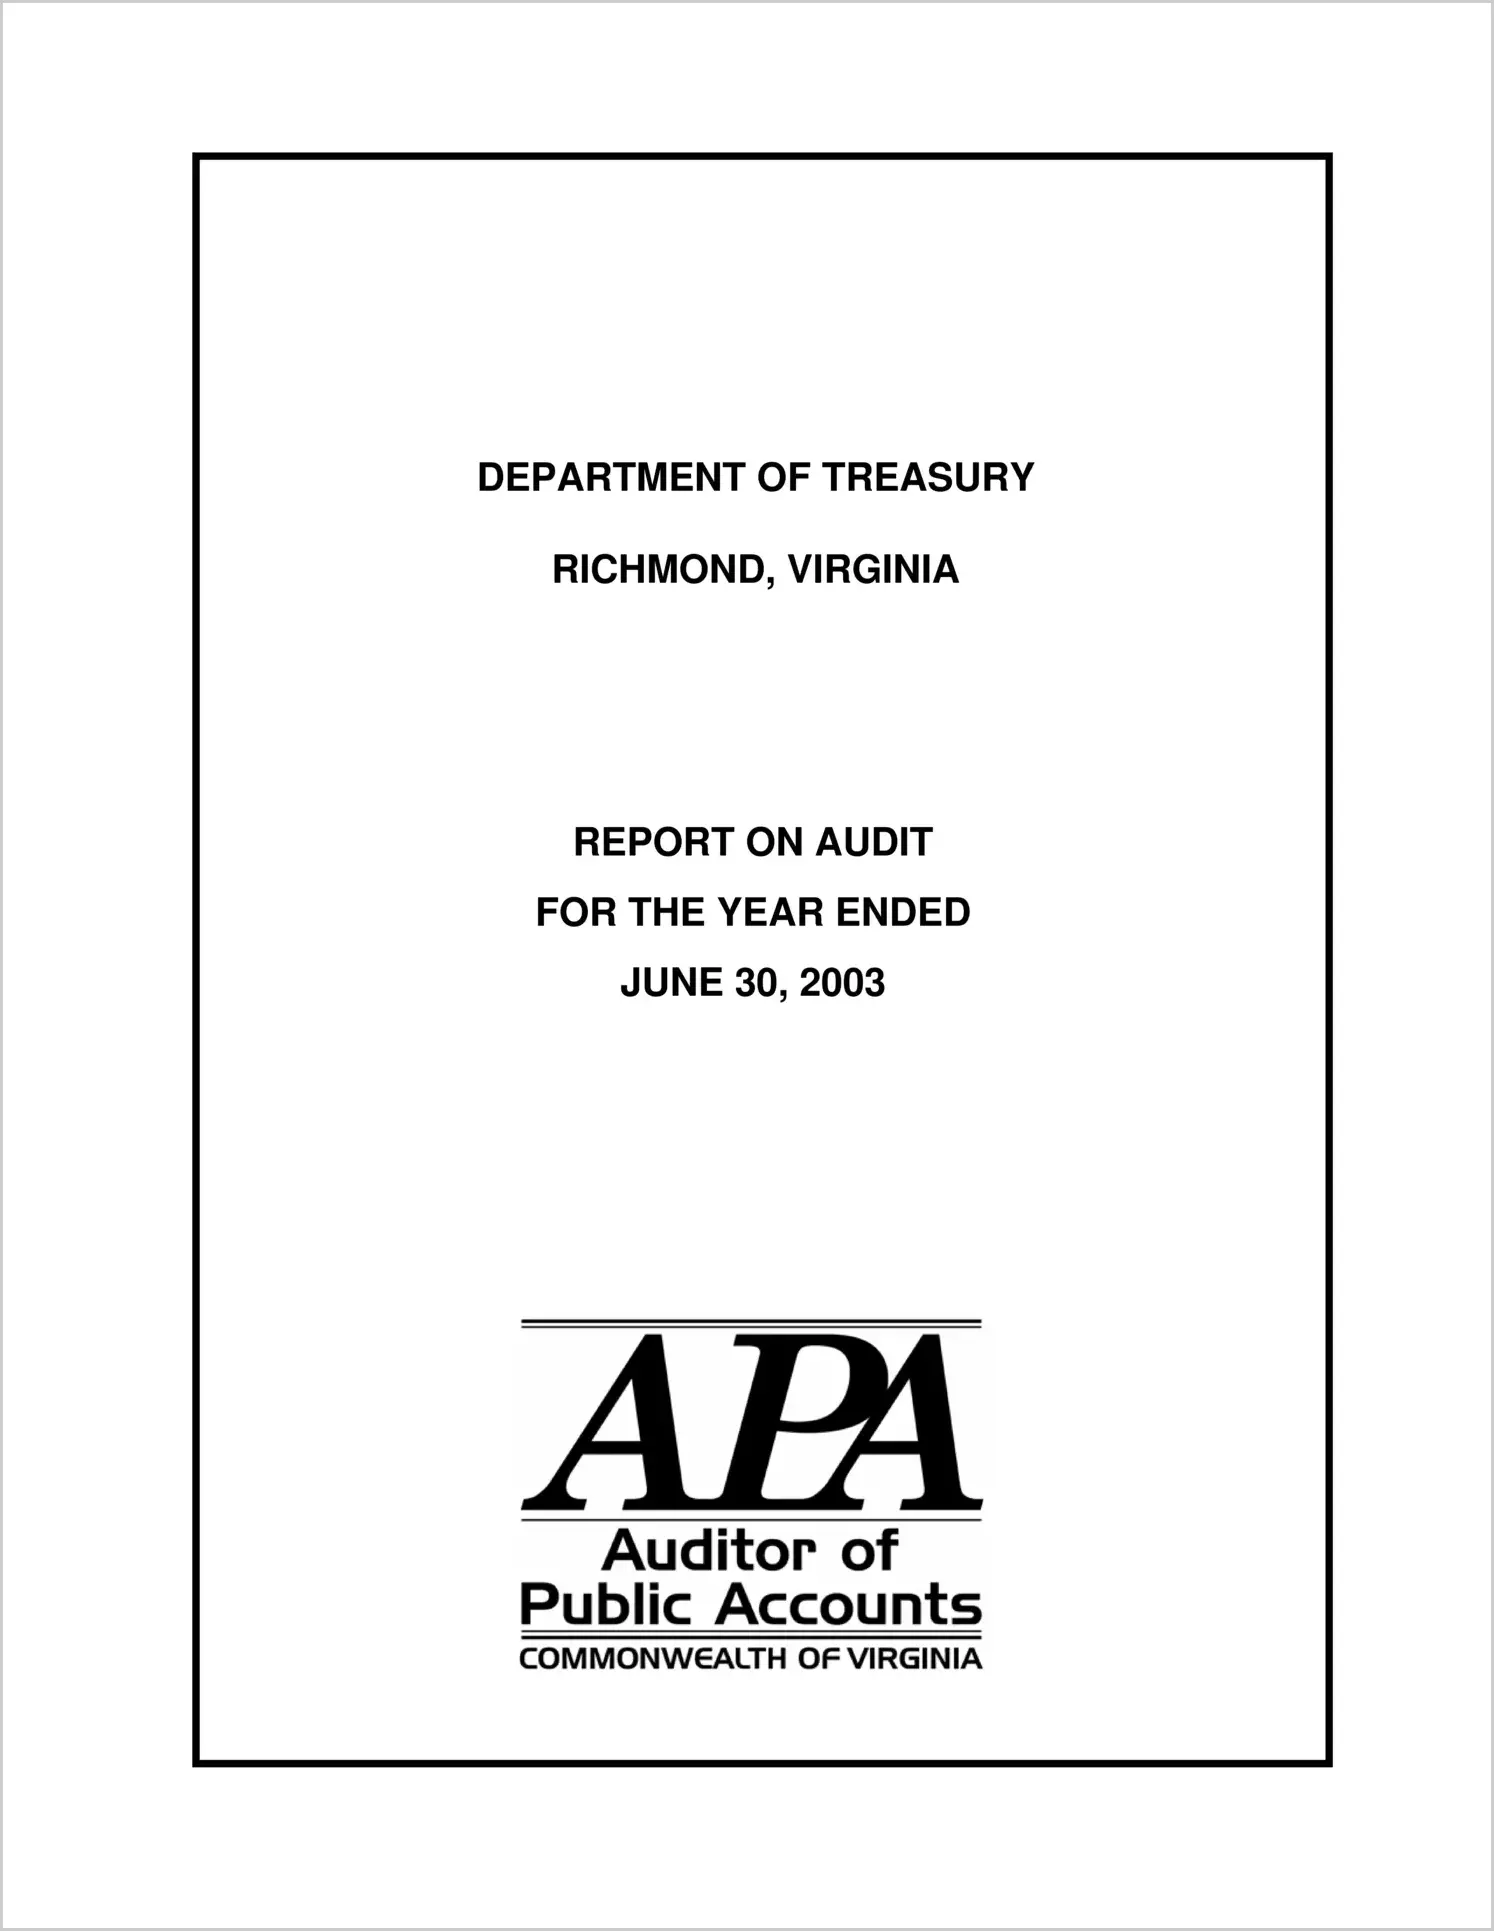 Department of Treasury for the year ended June 30, 2003